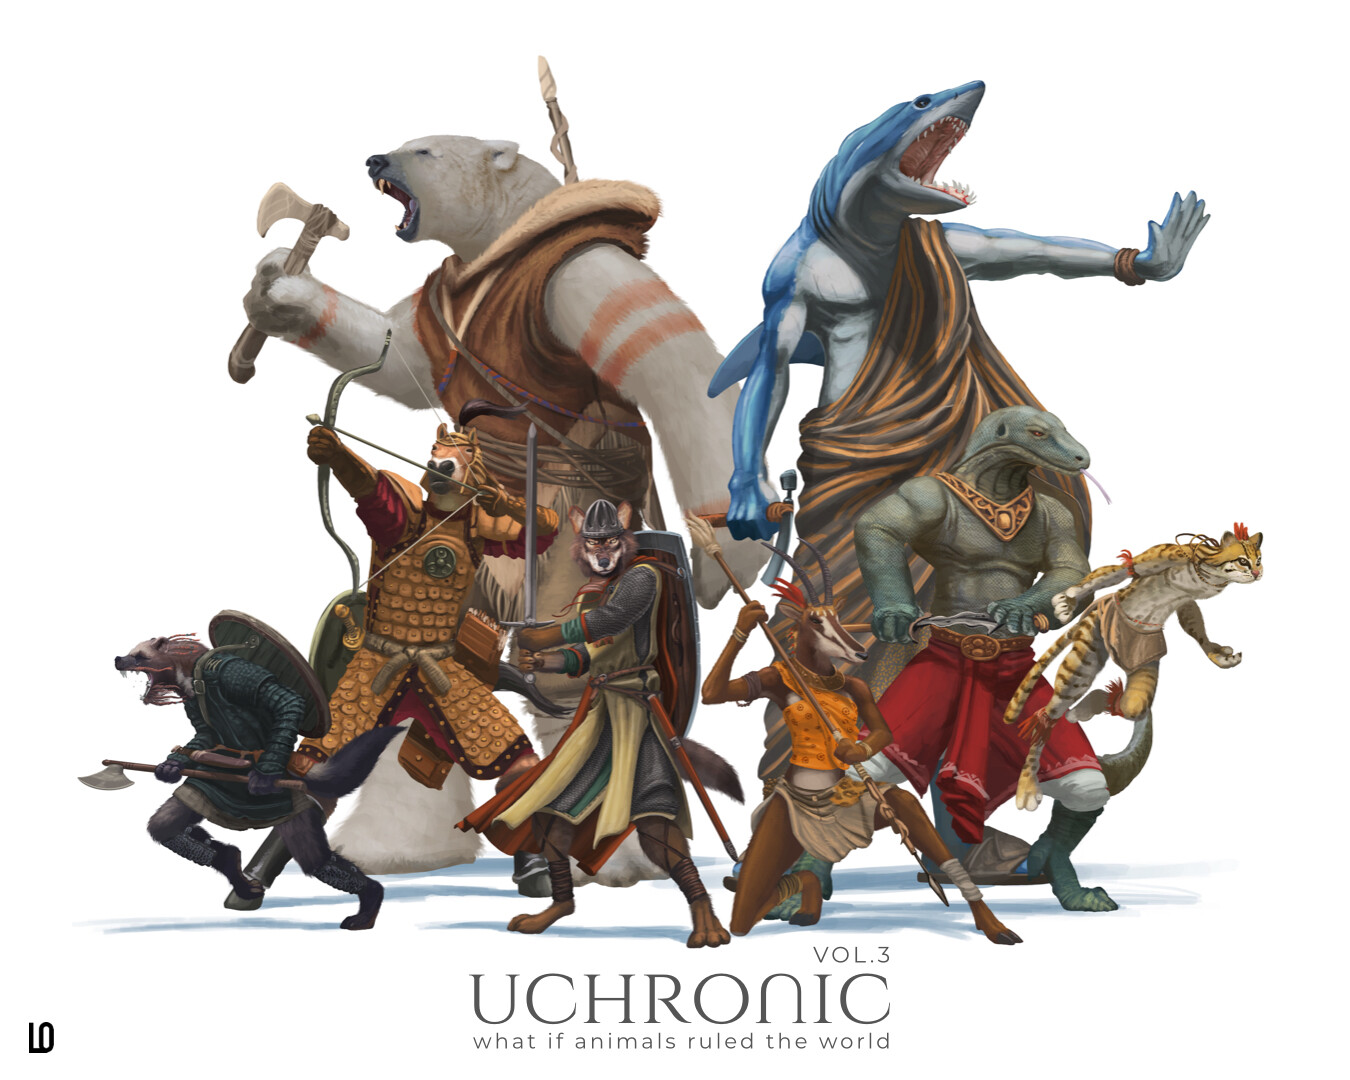 The eight characters from Uchronic Vol.3 reunited!